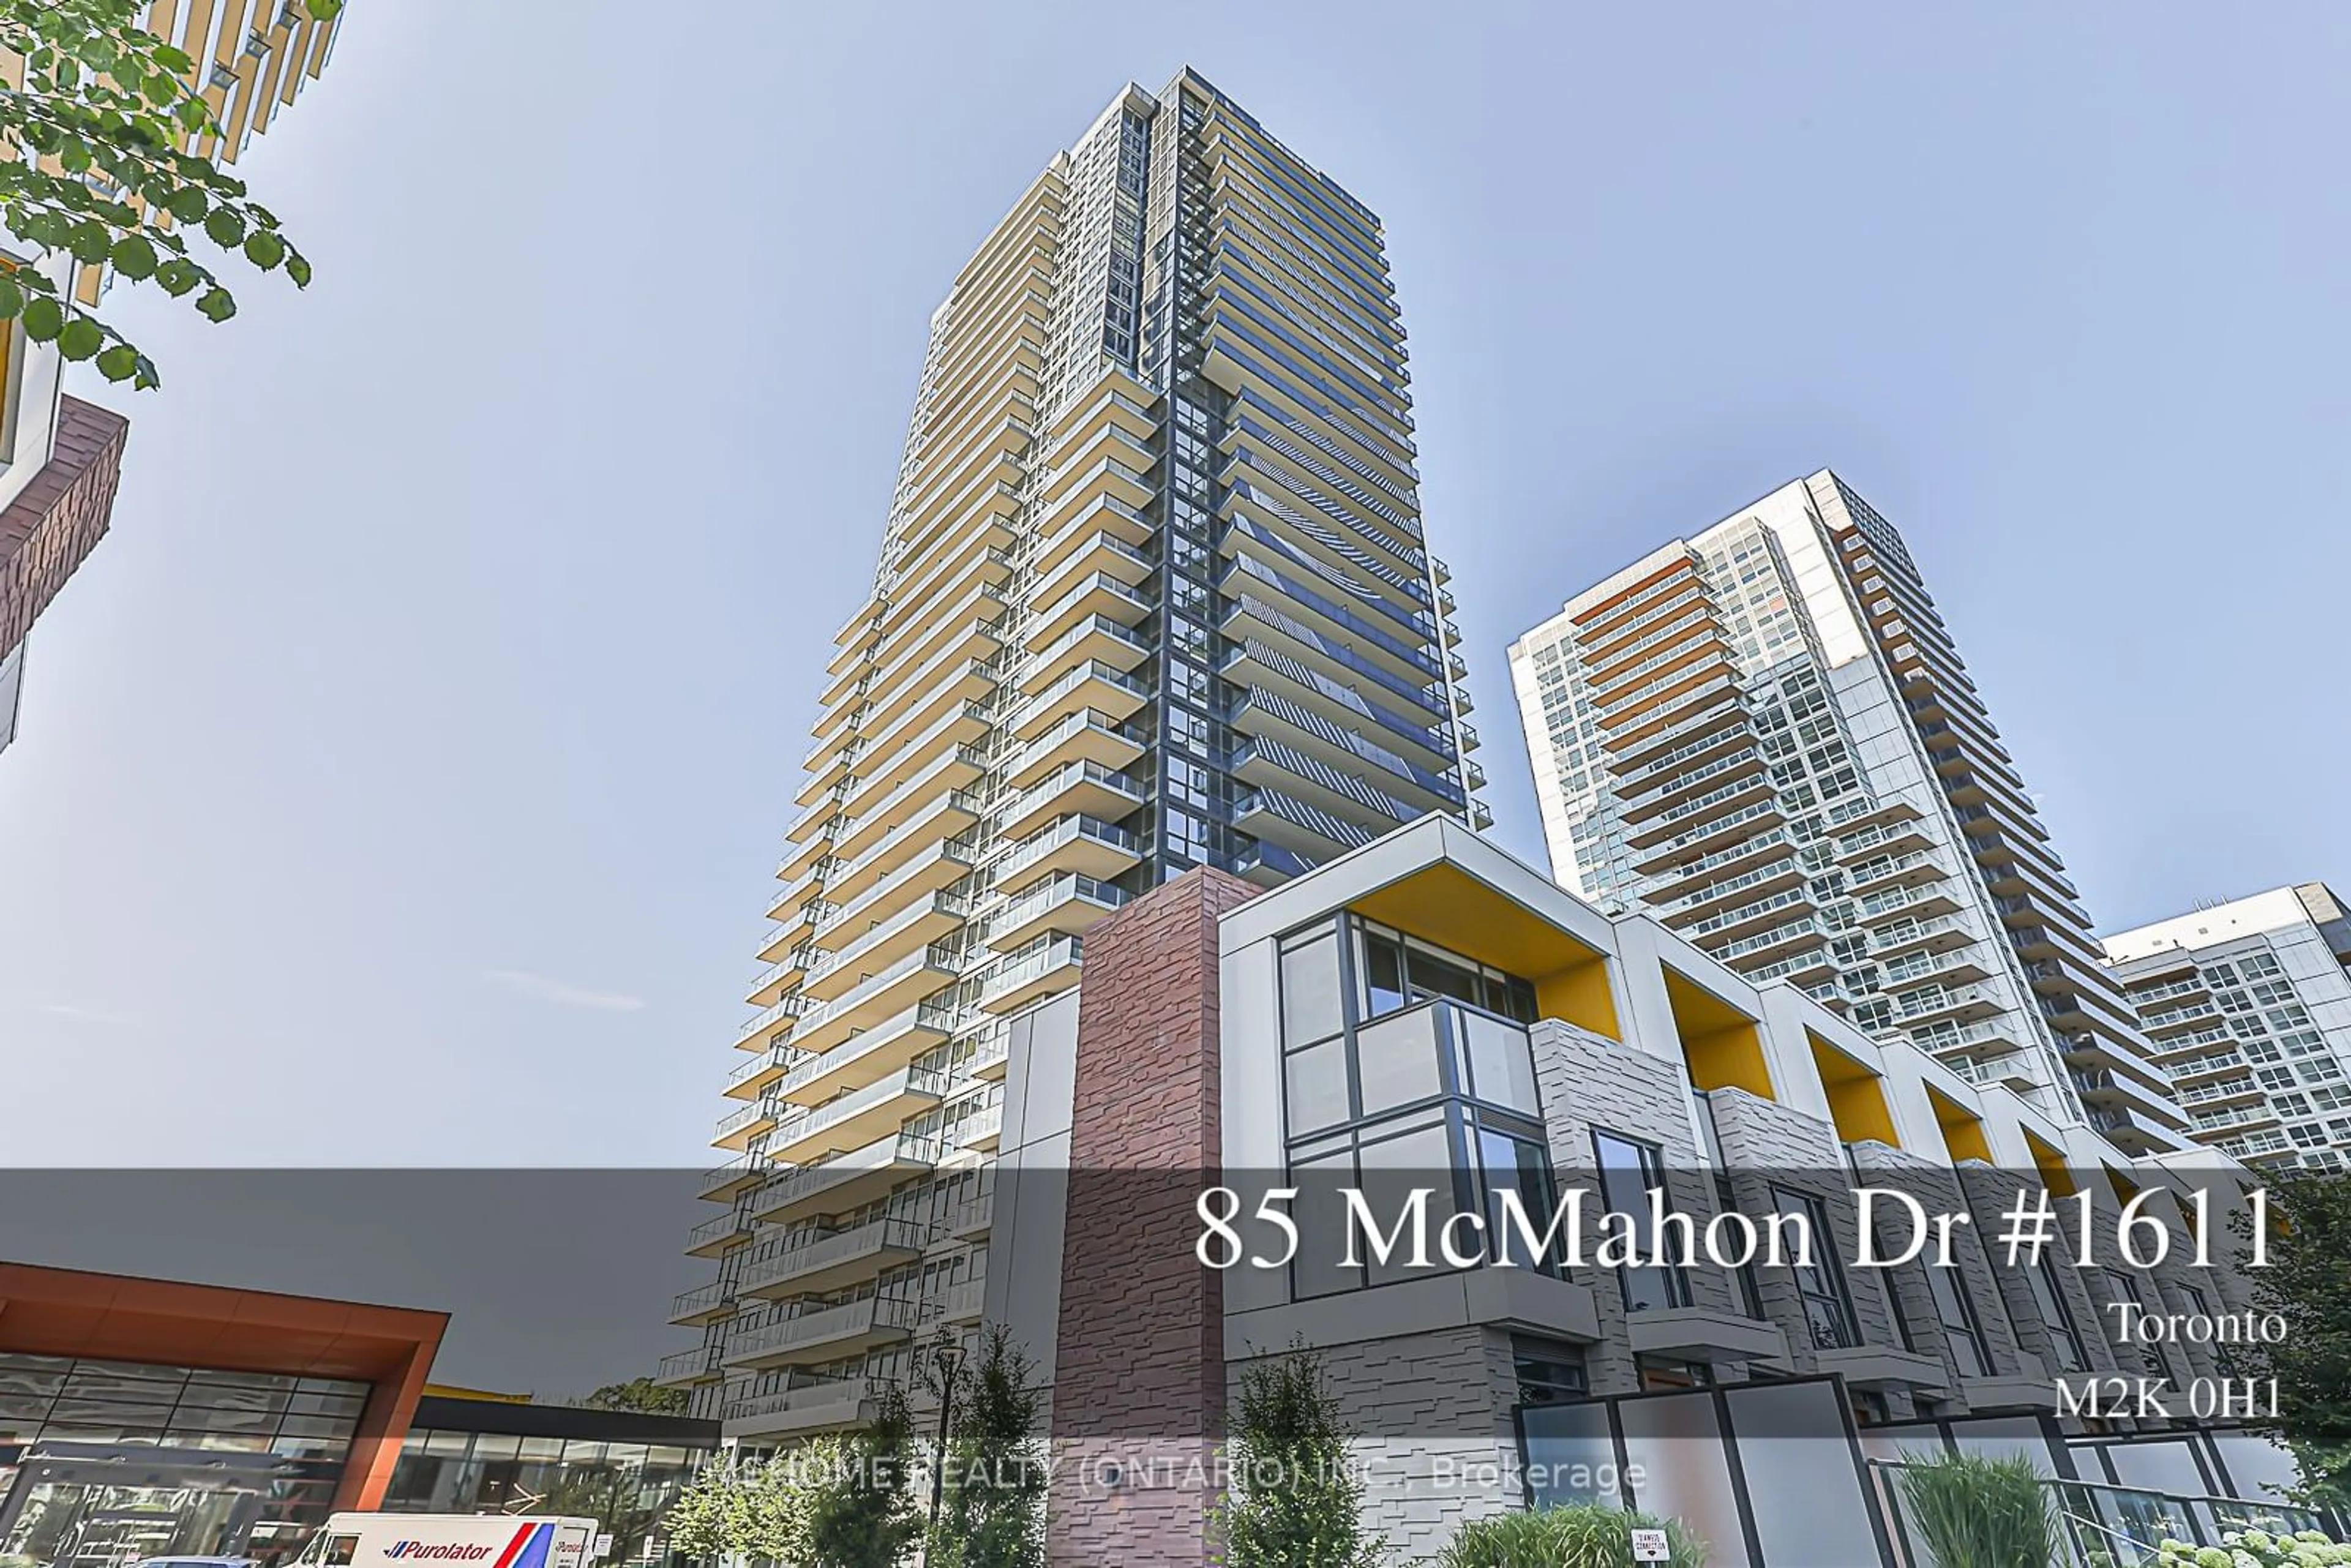 A pic from exterior of the house or condo for 85 McMahon Dr #1611, Toronto Ontario M2K 0H1